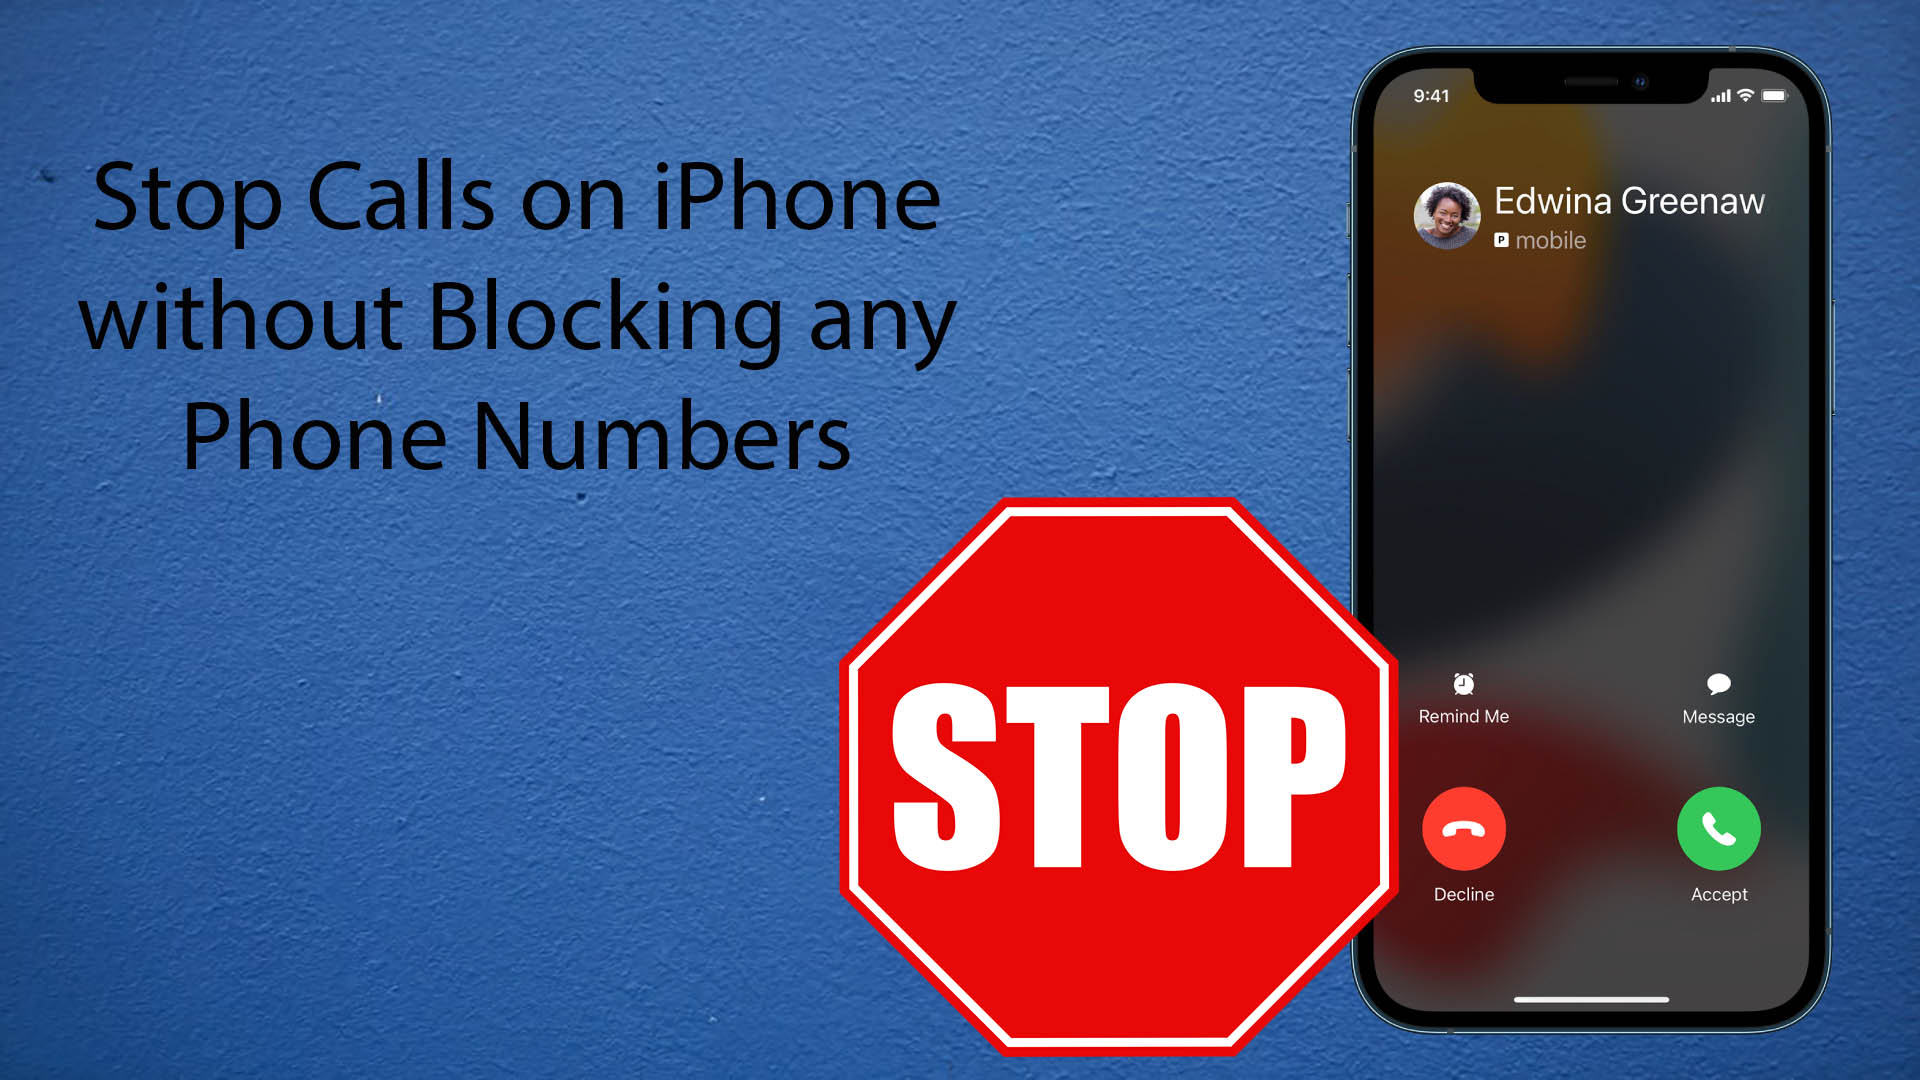 How to Stop Calls on iPhone without Blocking them – A Complete Guide